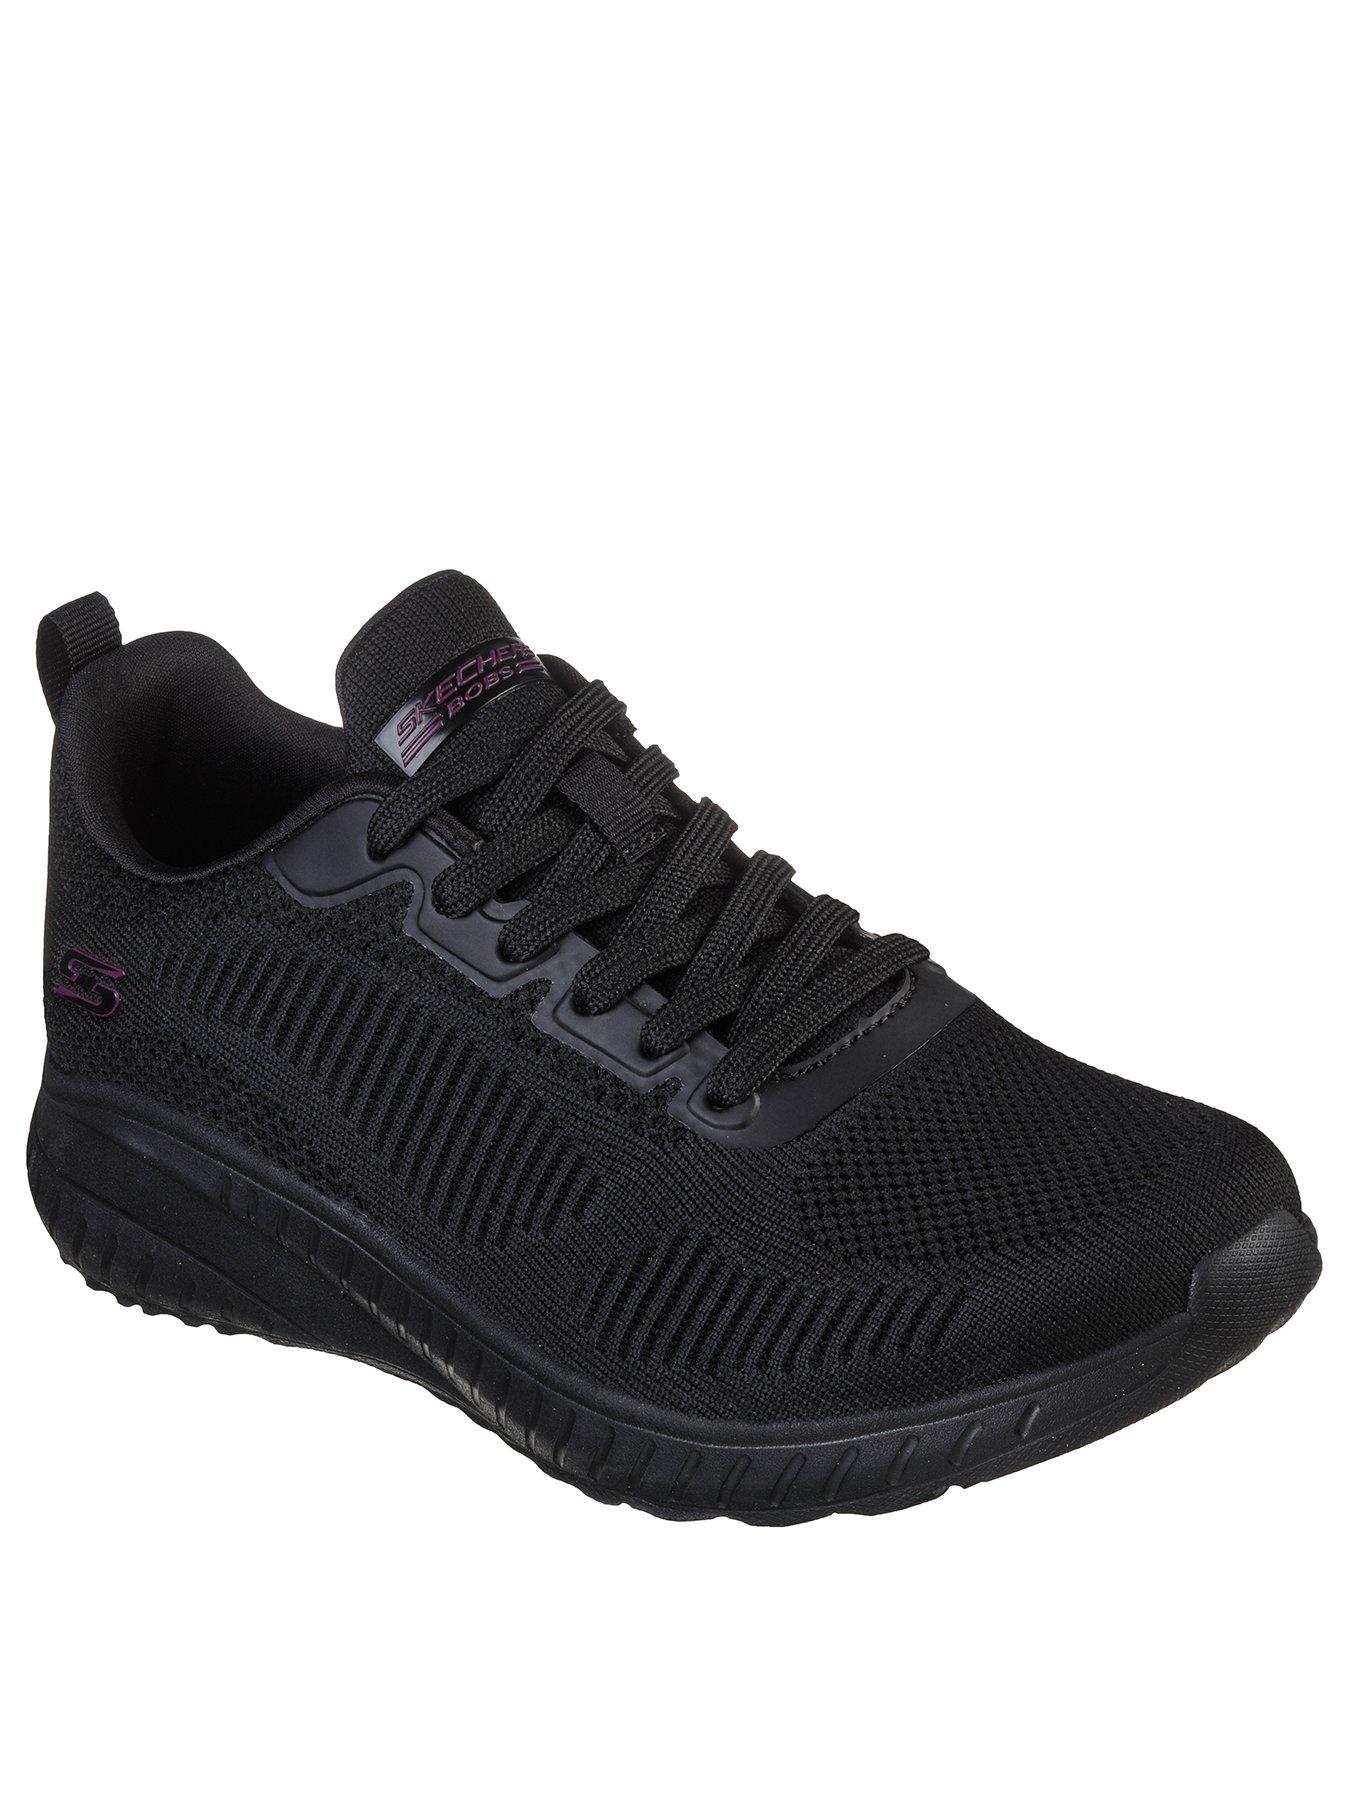 Skechers Bobs Squad Chaos Wide Black very.co.uk